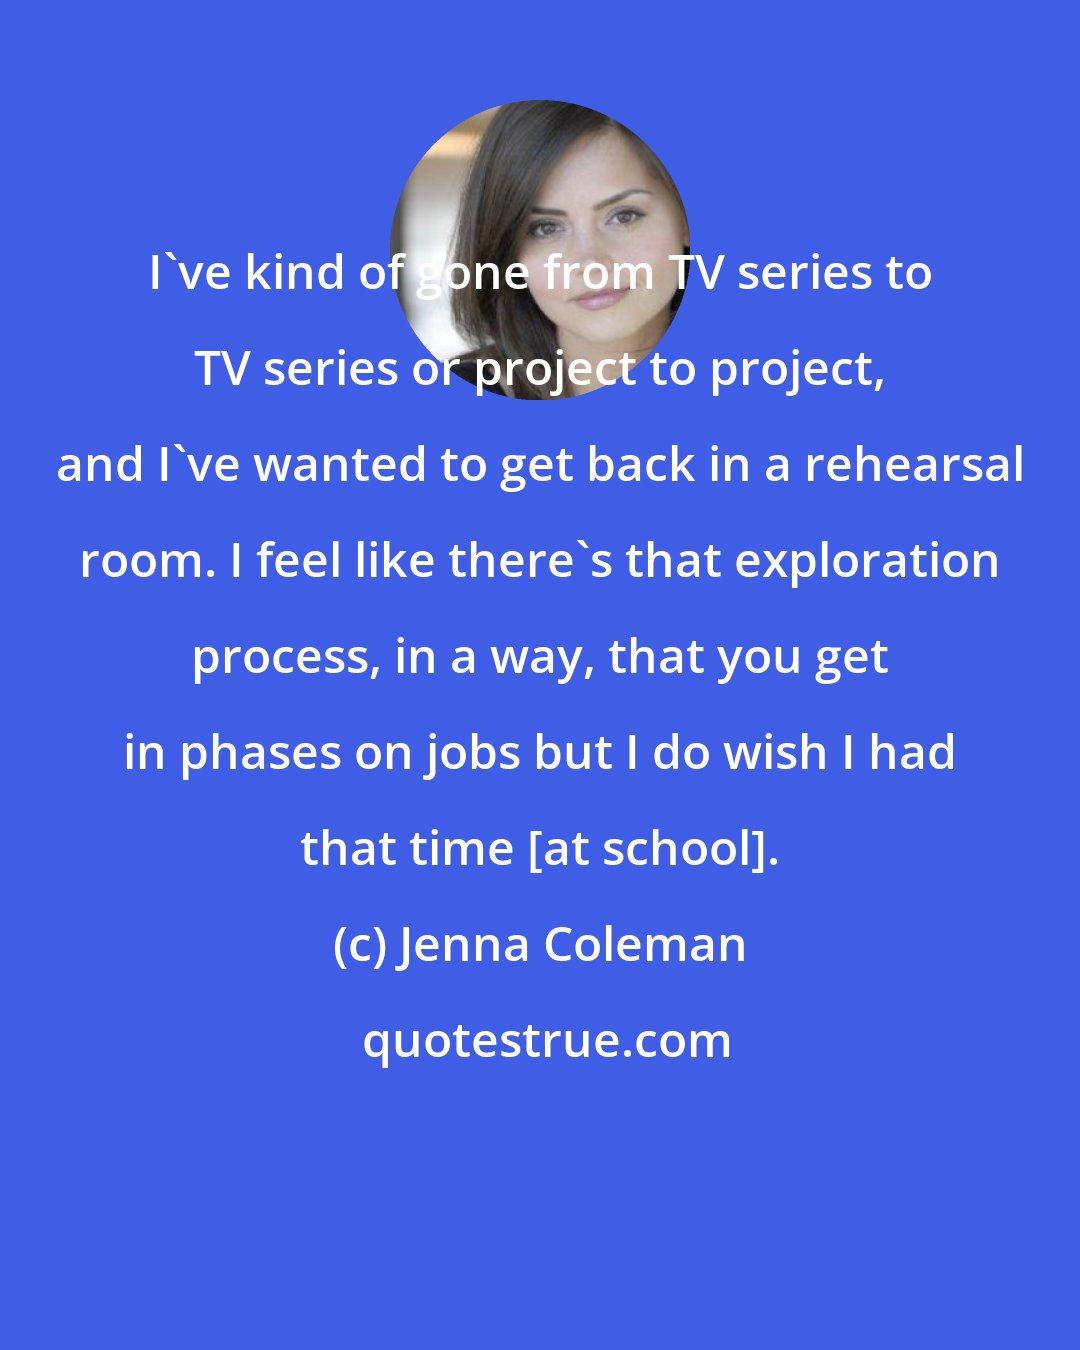 Jenna Coleman: I've kind of gone from TV series to TV series or project to project, and I've wanted to get back in a rehearsal room. I feel like there's that exploration process, in a way, that you get in phases on jobs but I do wish I had that time [at school].